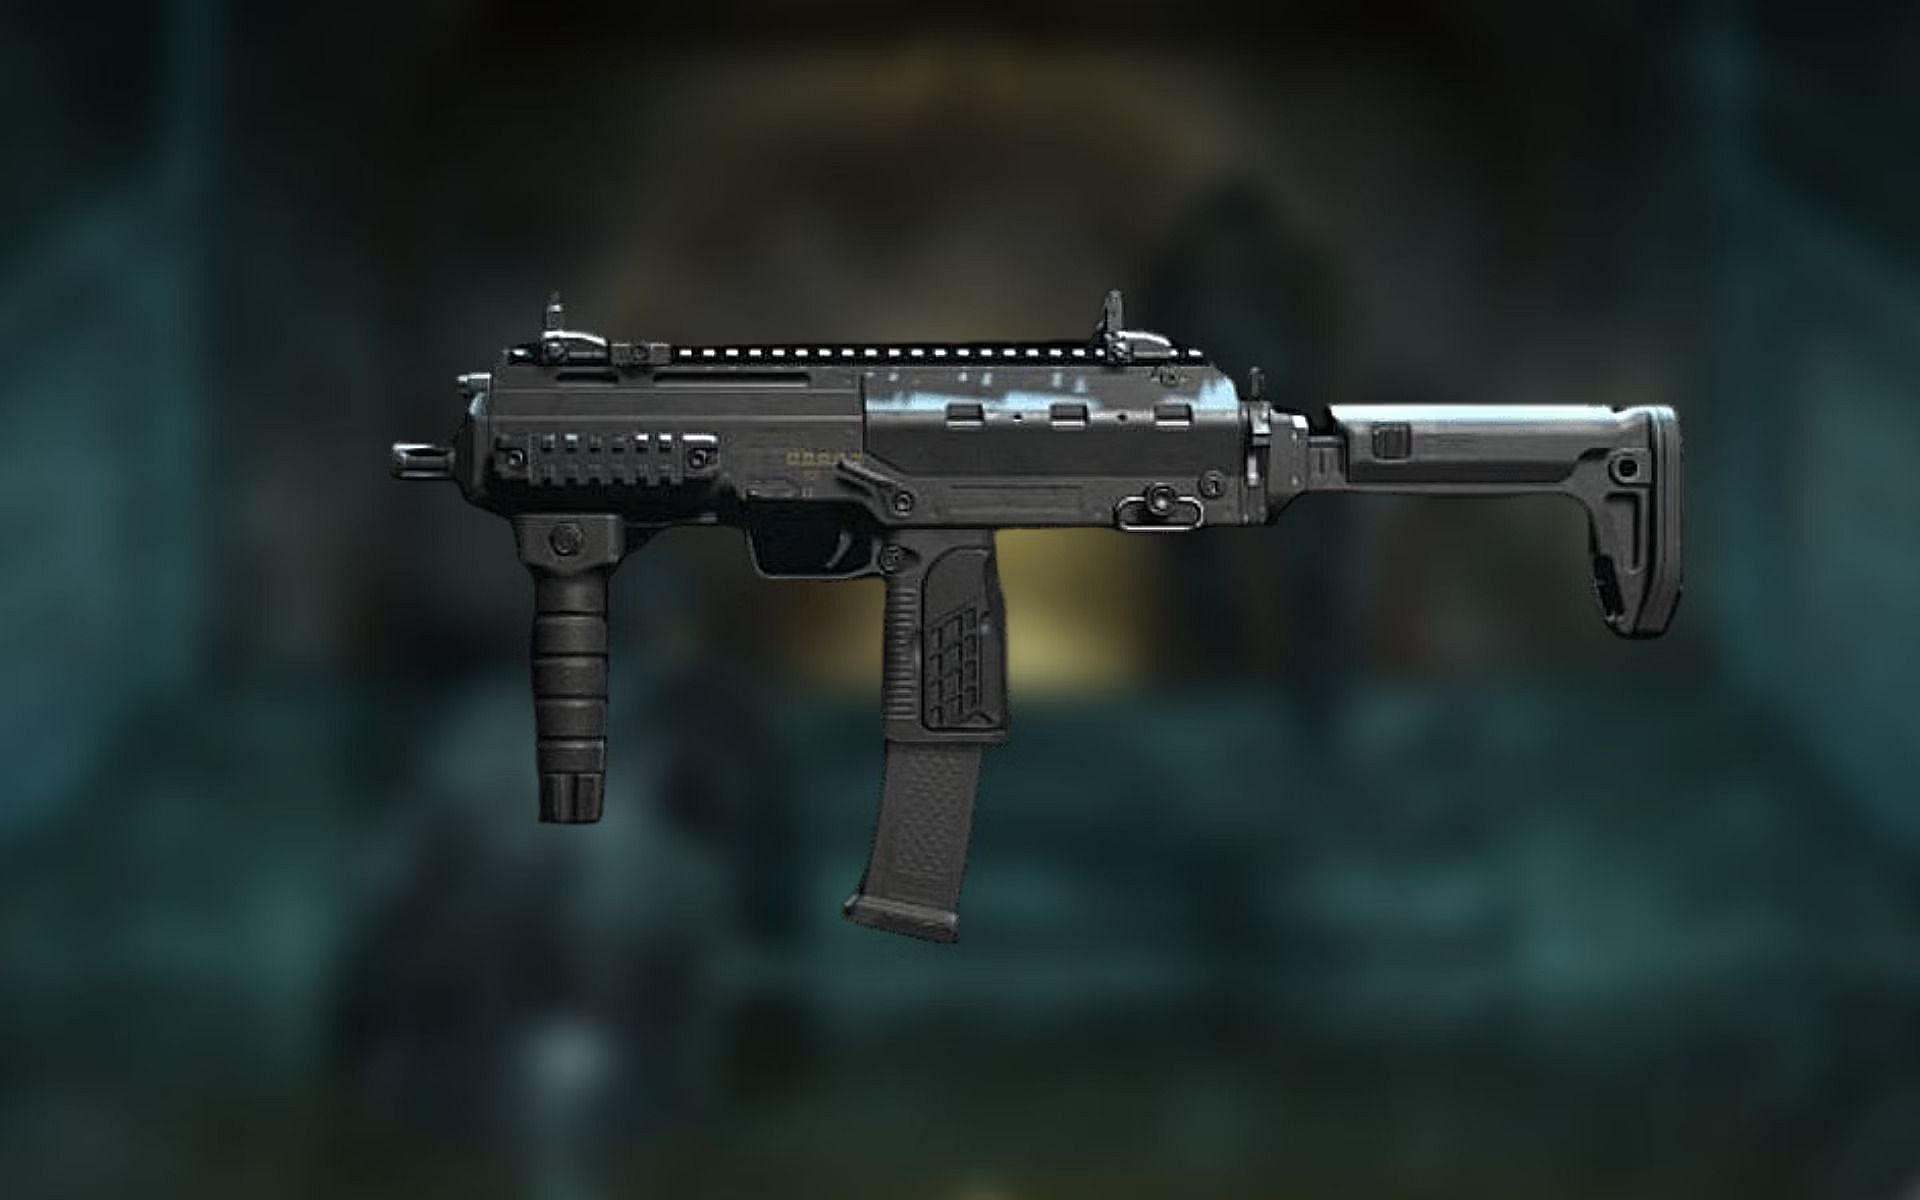 VEL 46 is the best meta SMG of Warzone 2 Season 2 Reloaded (Image via Activision and edited by Sportskeeda)